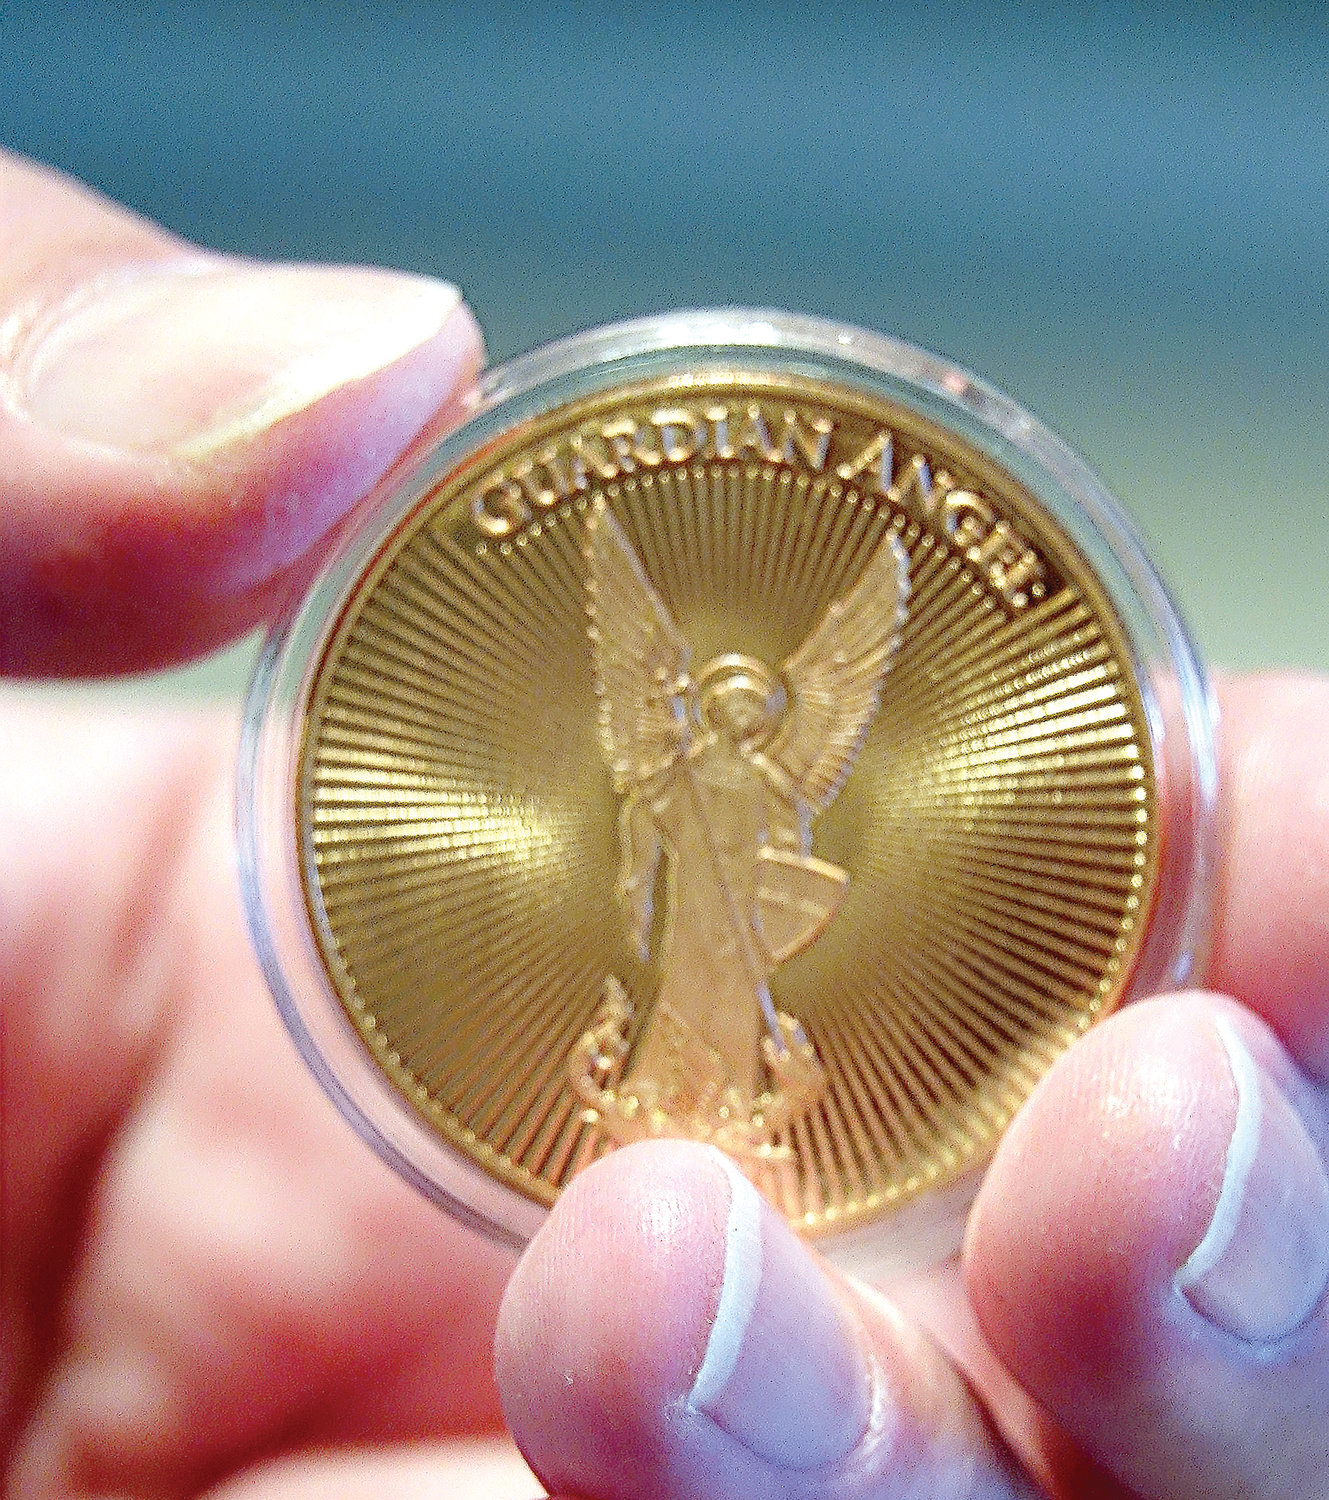 One of 500 archdiocesan Guardian Angel medallions blessed by Cardinal Dolan and distributed to the victims’ families.